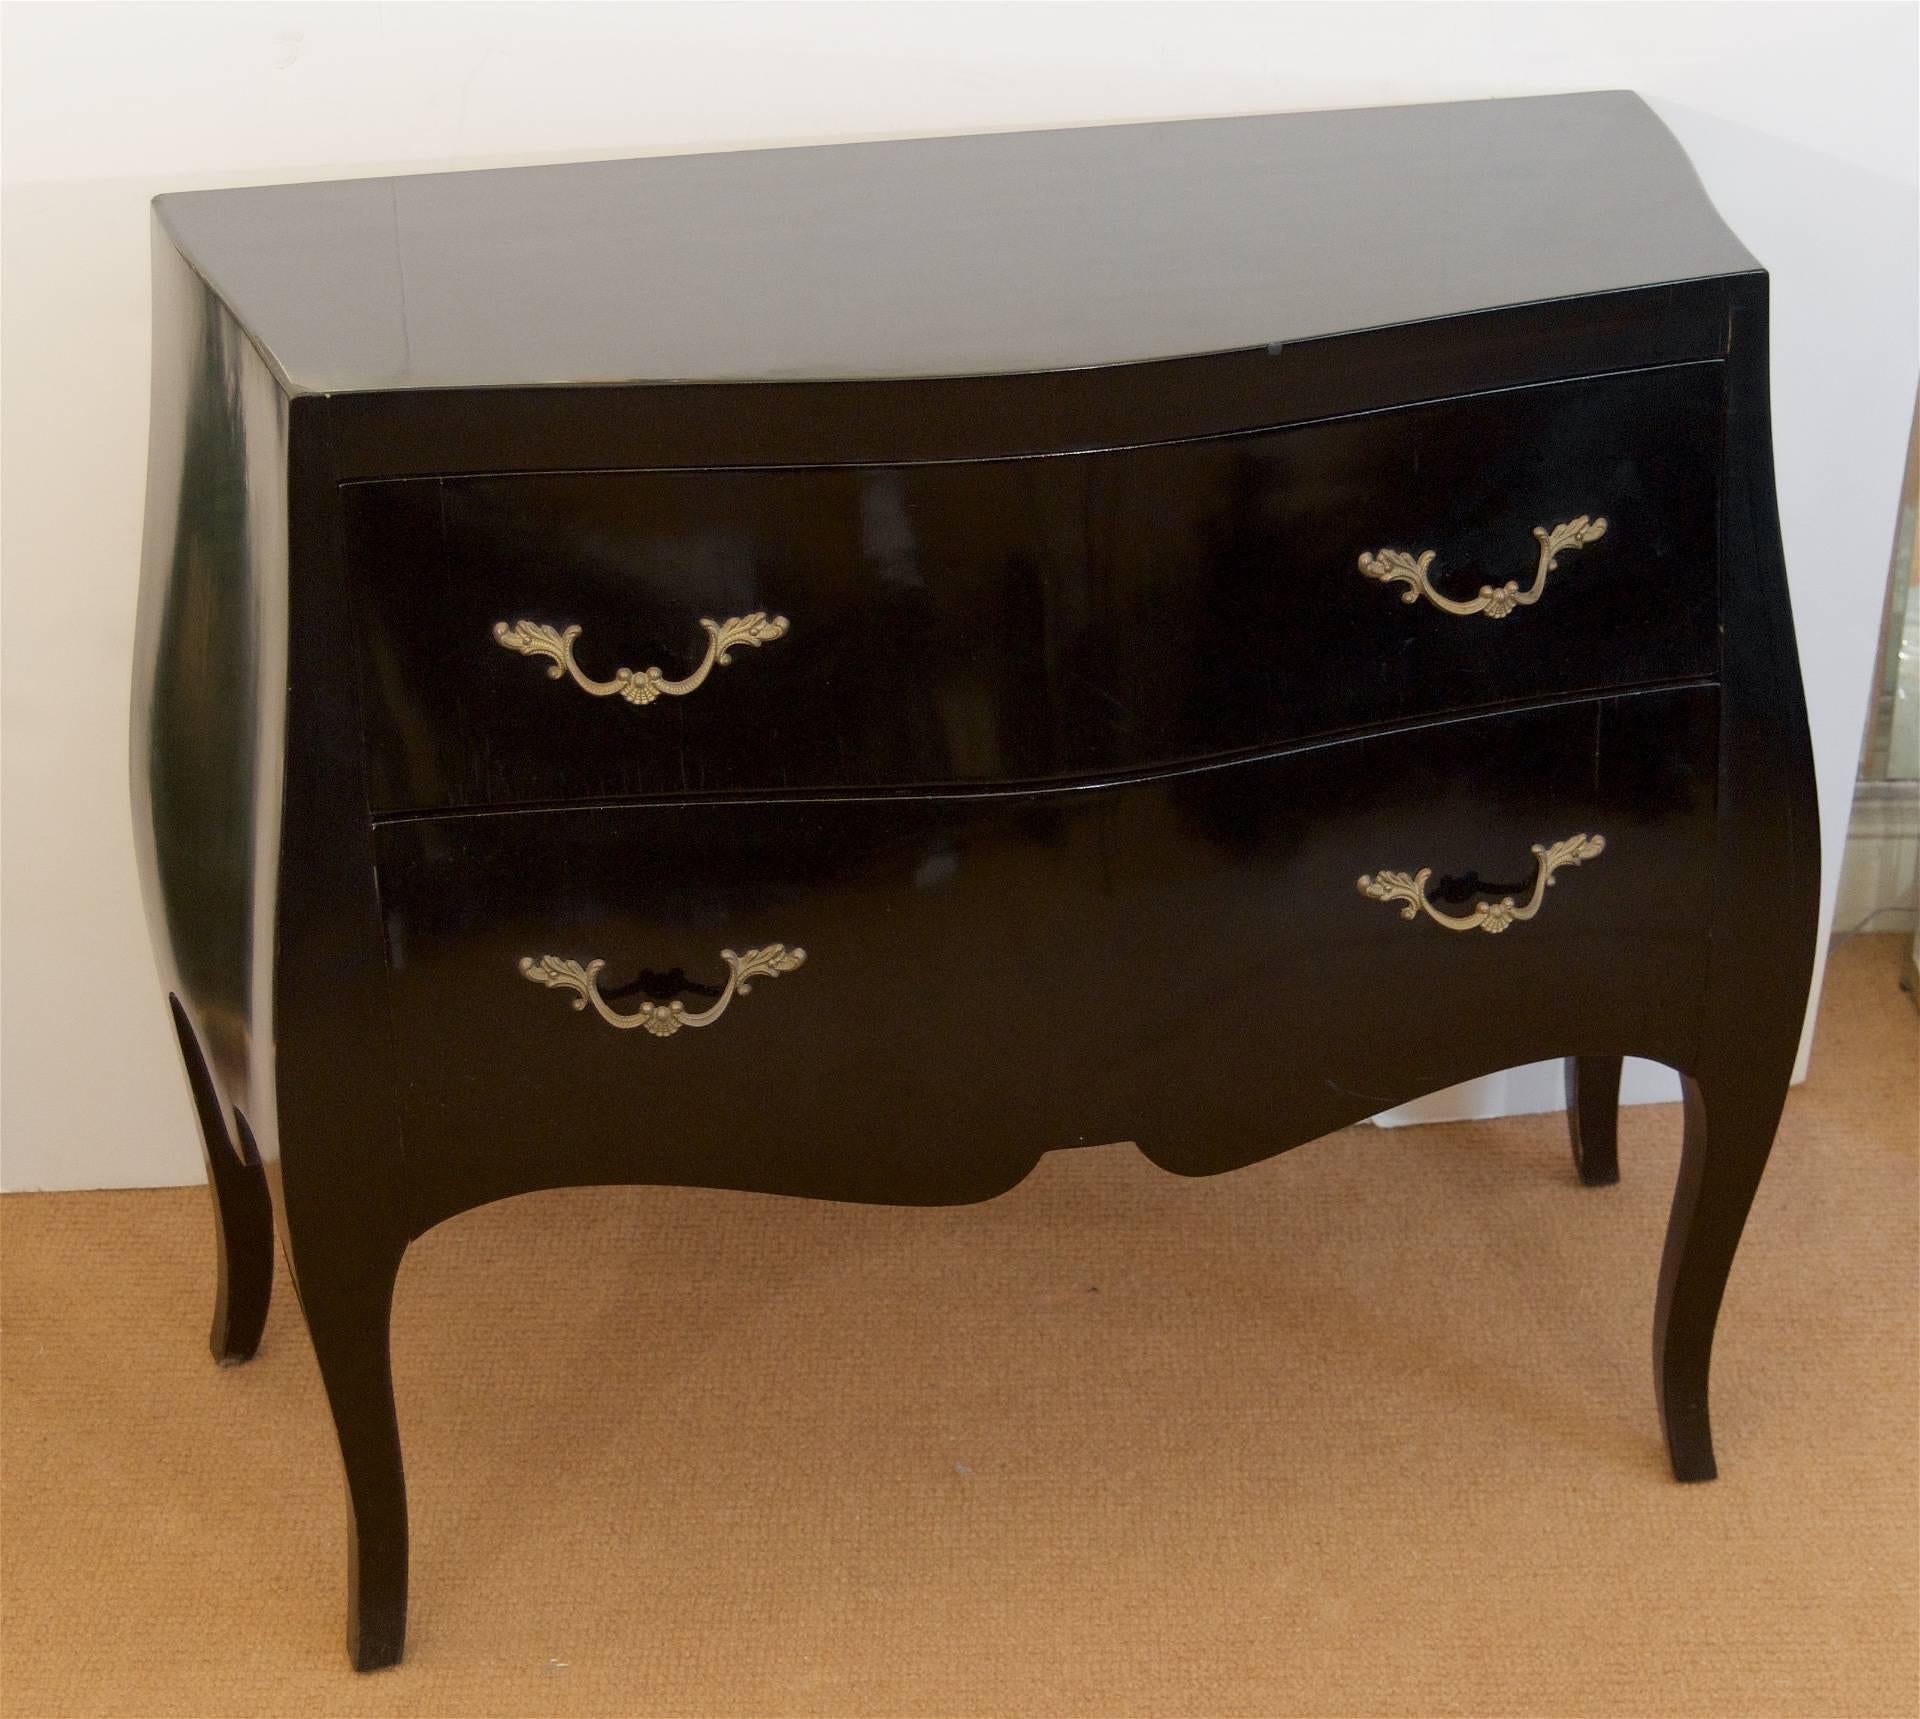 Beautiful black lacquered bombe chest with brass pulls. Interiors lined with fleur-de-lis paper.